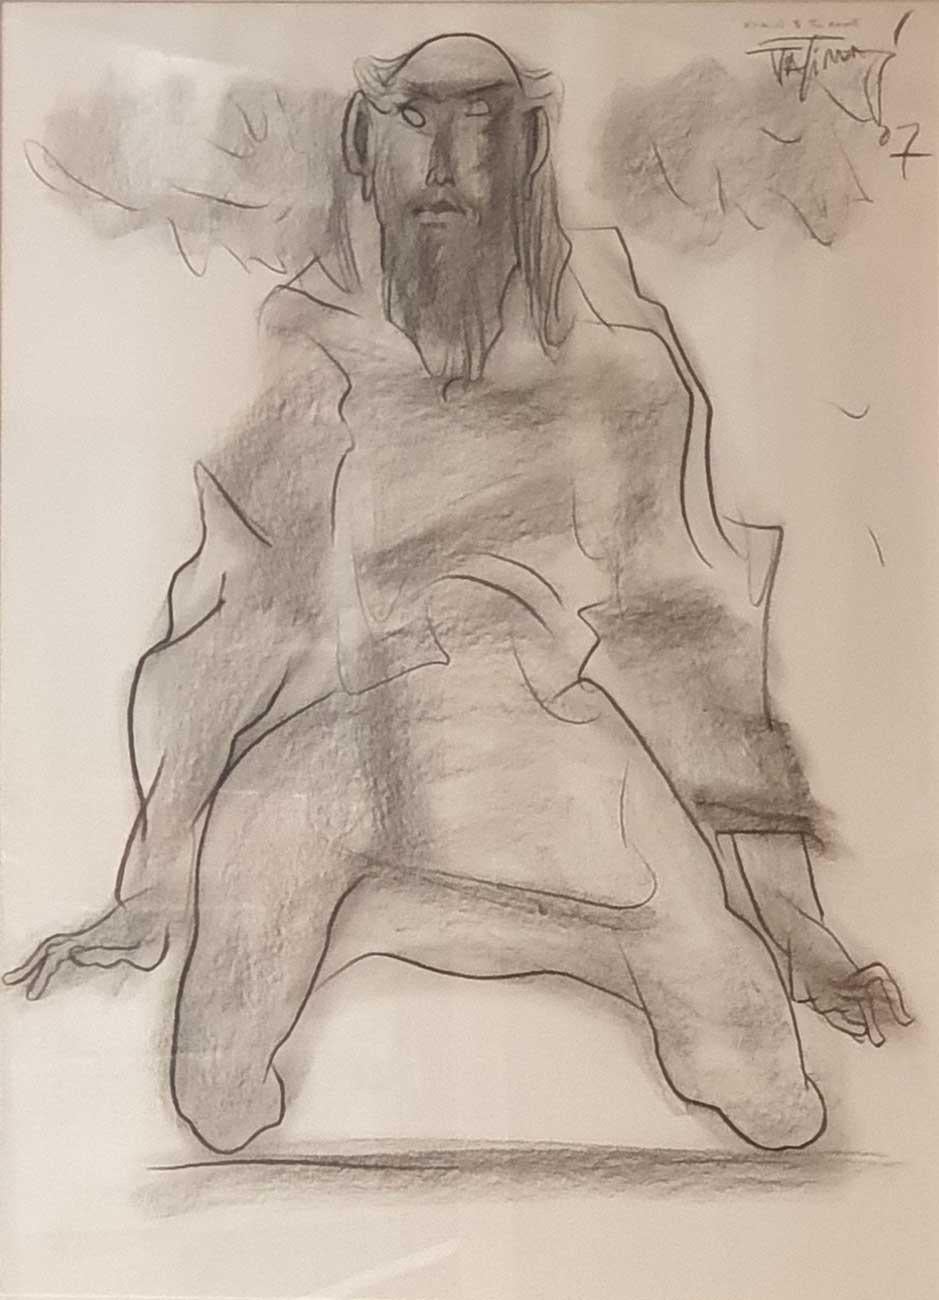 Kneeled to the Earth, Charcoal on Paper, Black by Modern Artist "In Stock"